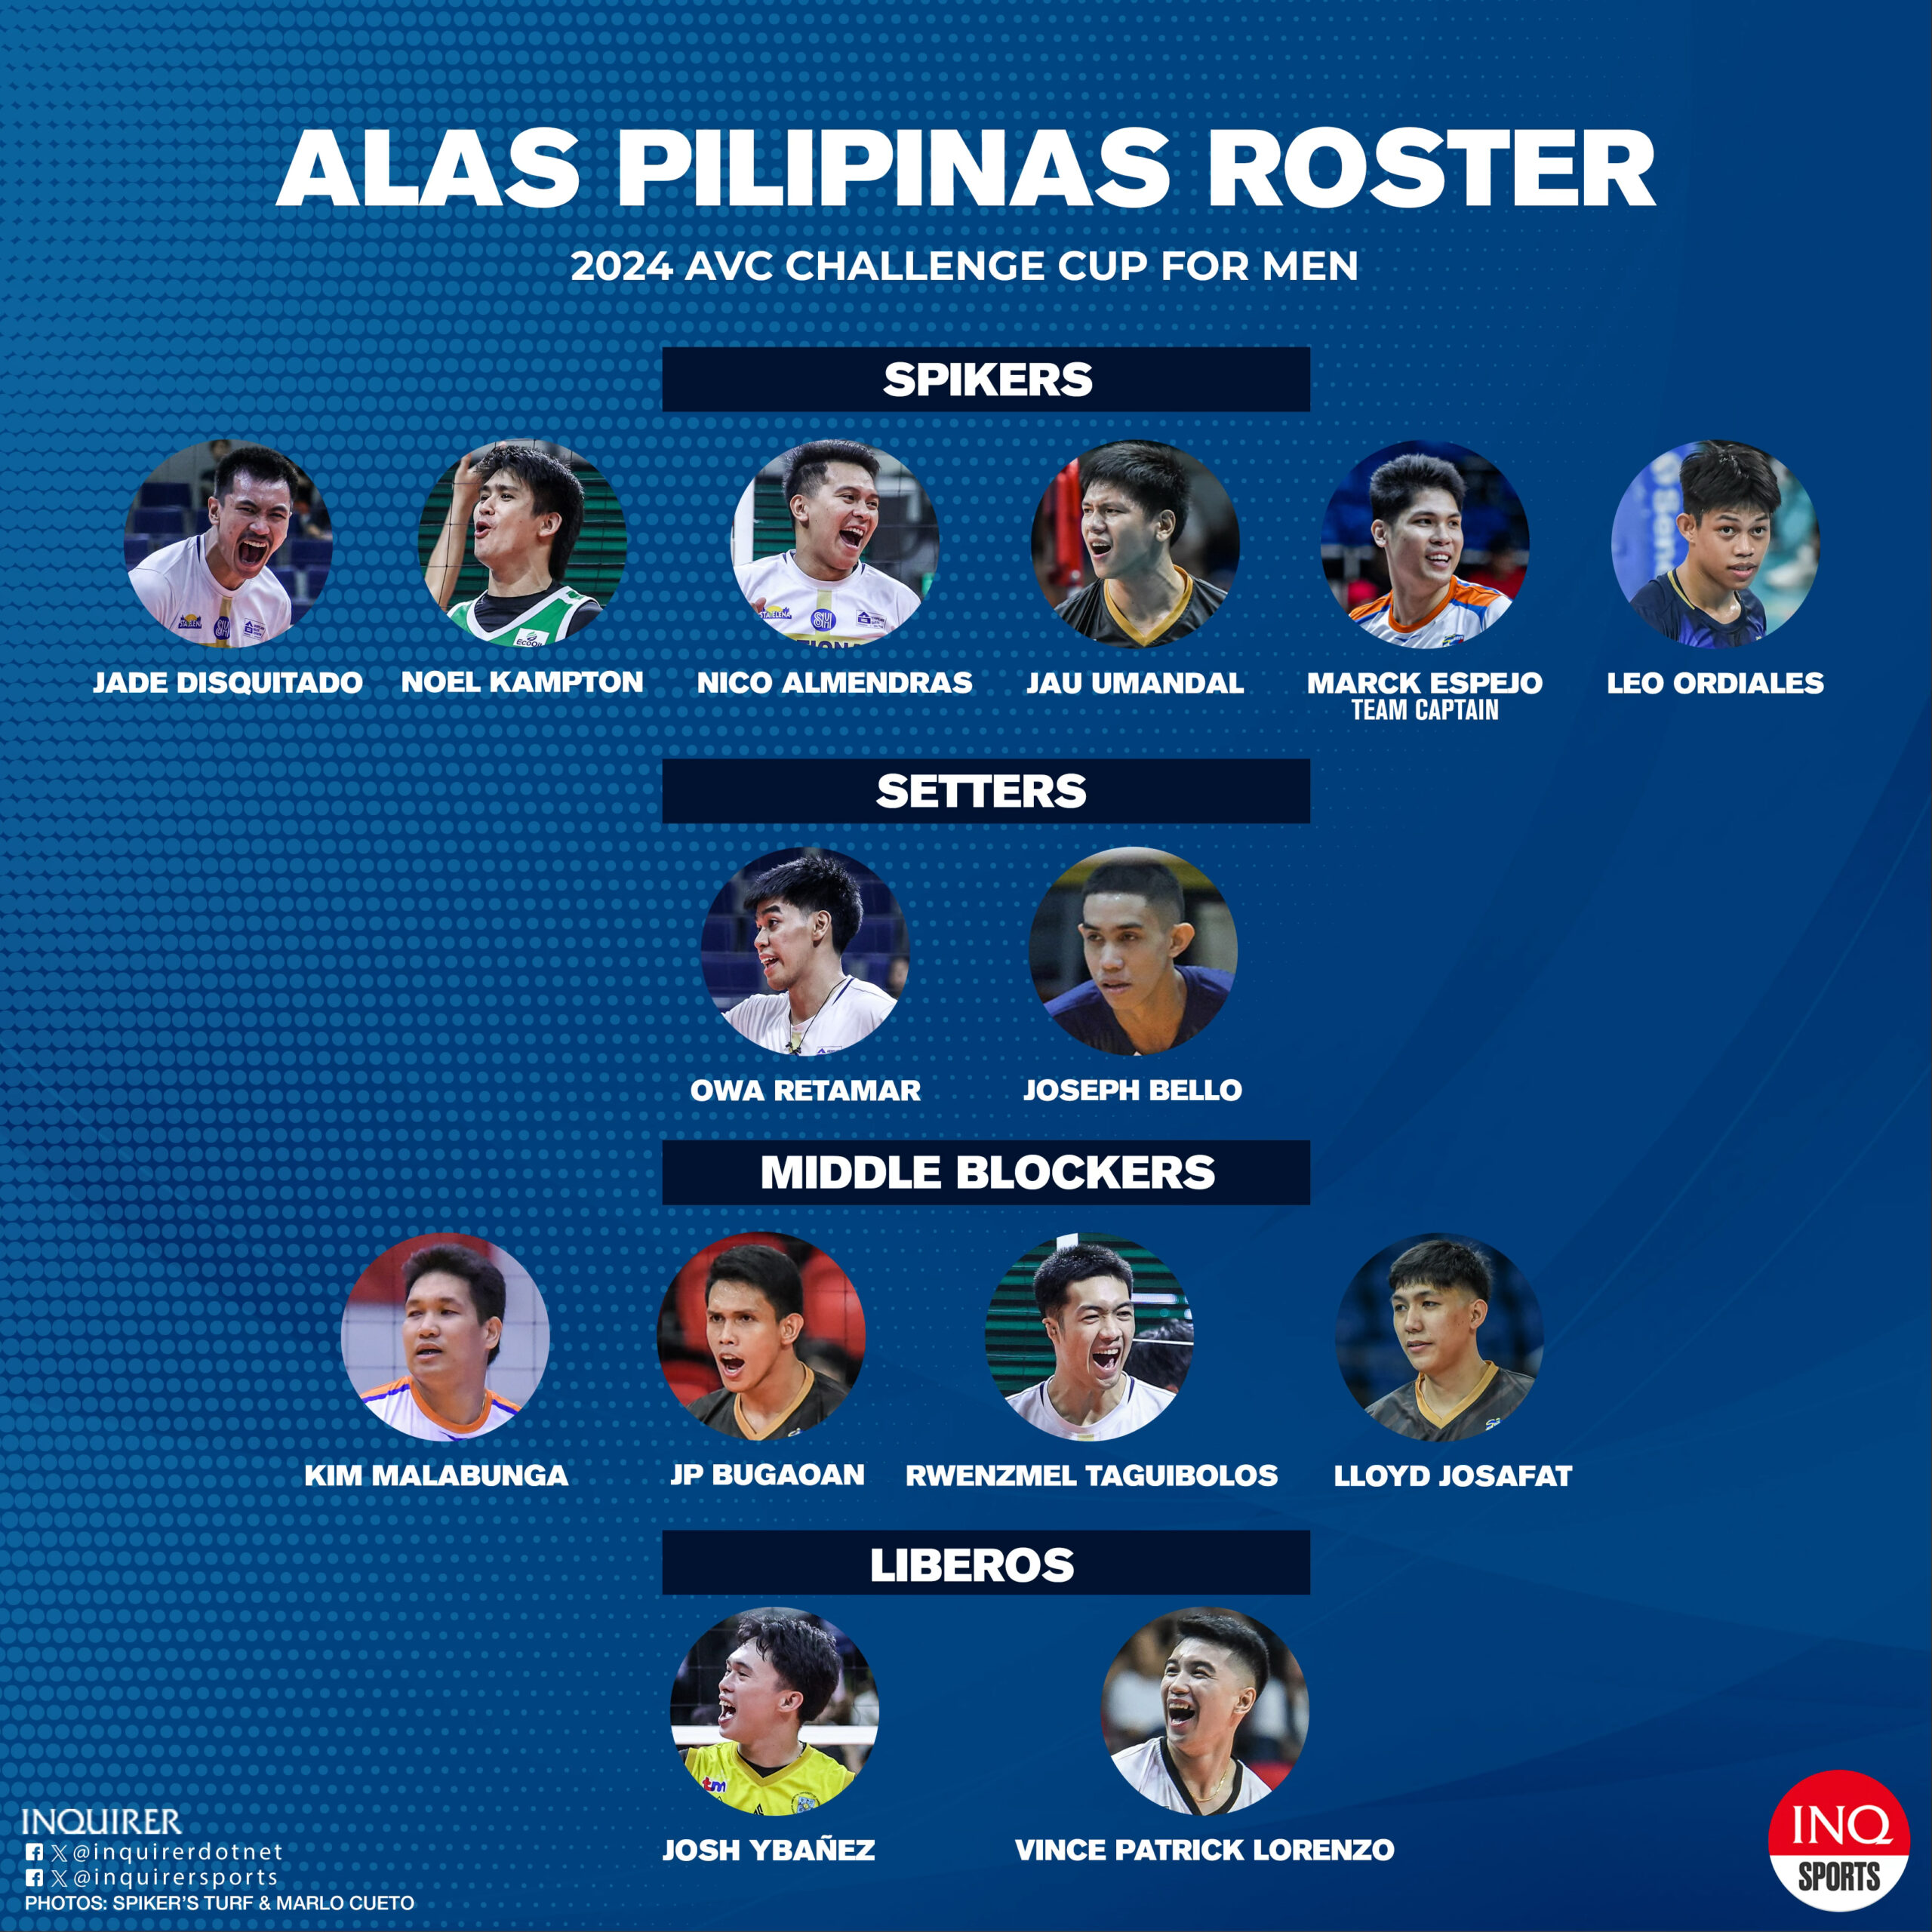 Alas Pilipinas lineup at the AVC Challenge Cup for Men 2024